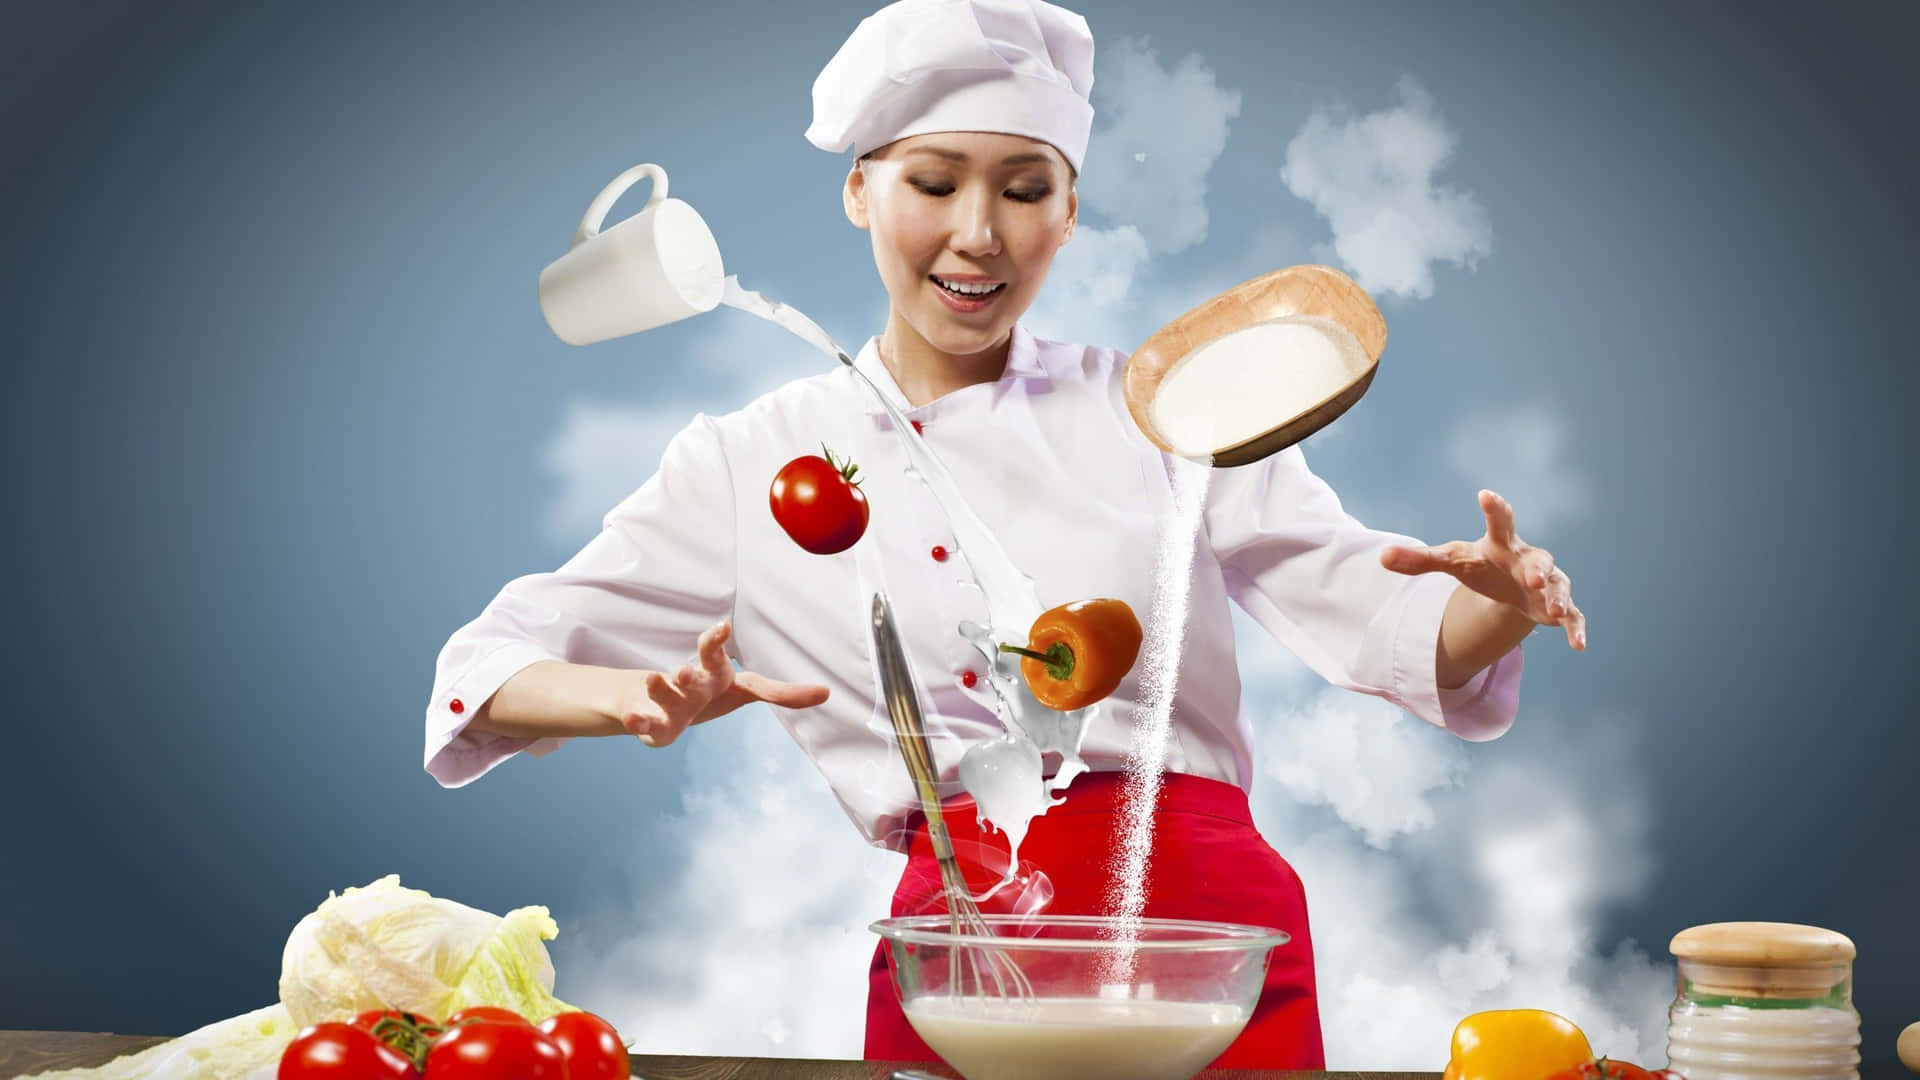 Chef Pictures 2560 X 1440 Picture